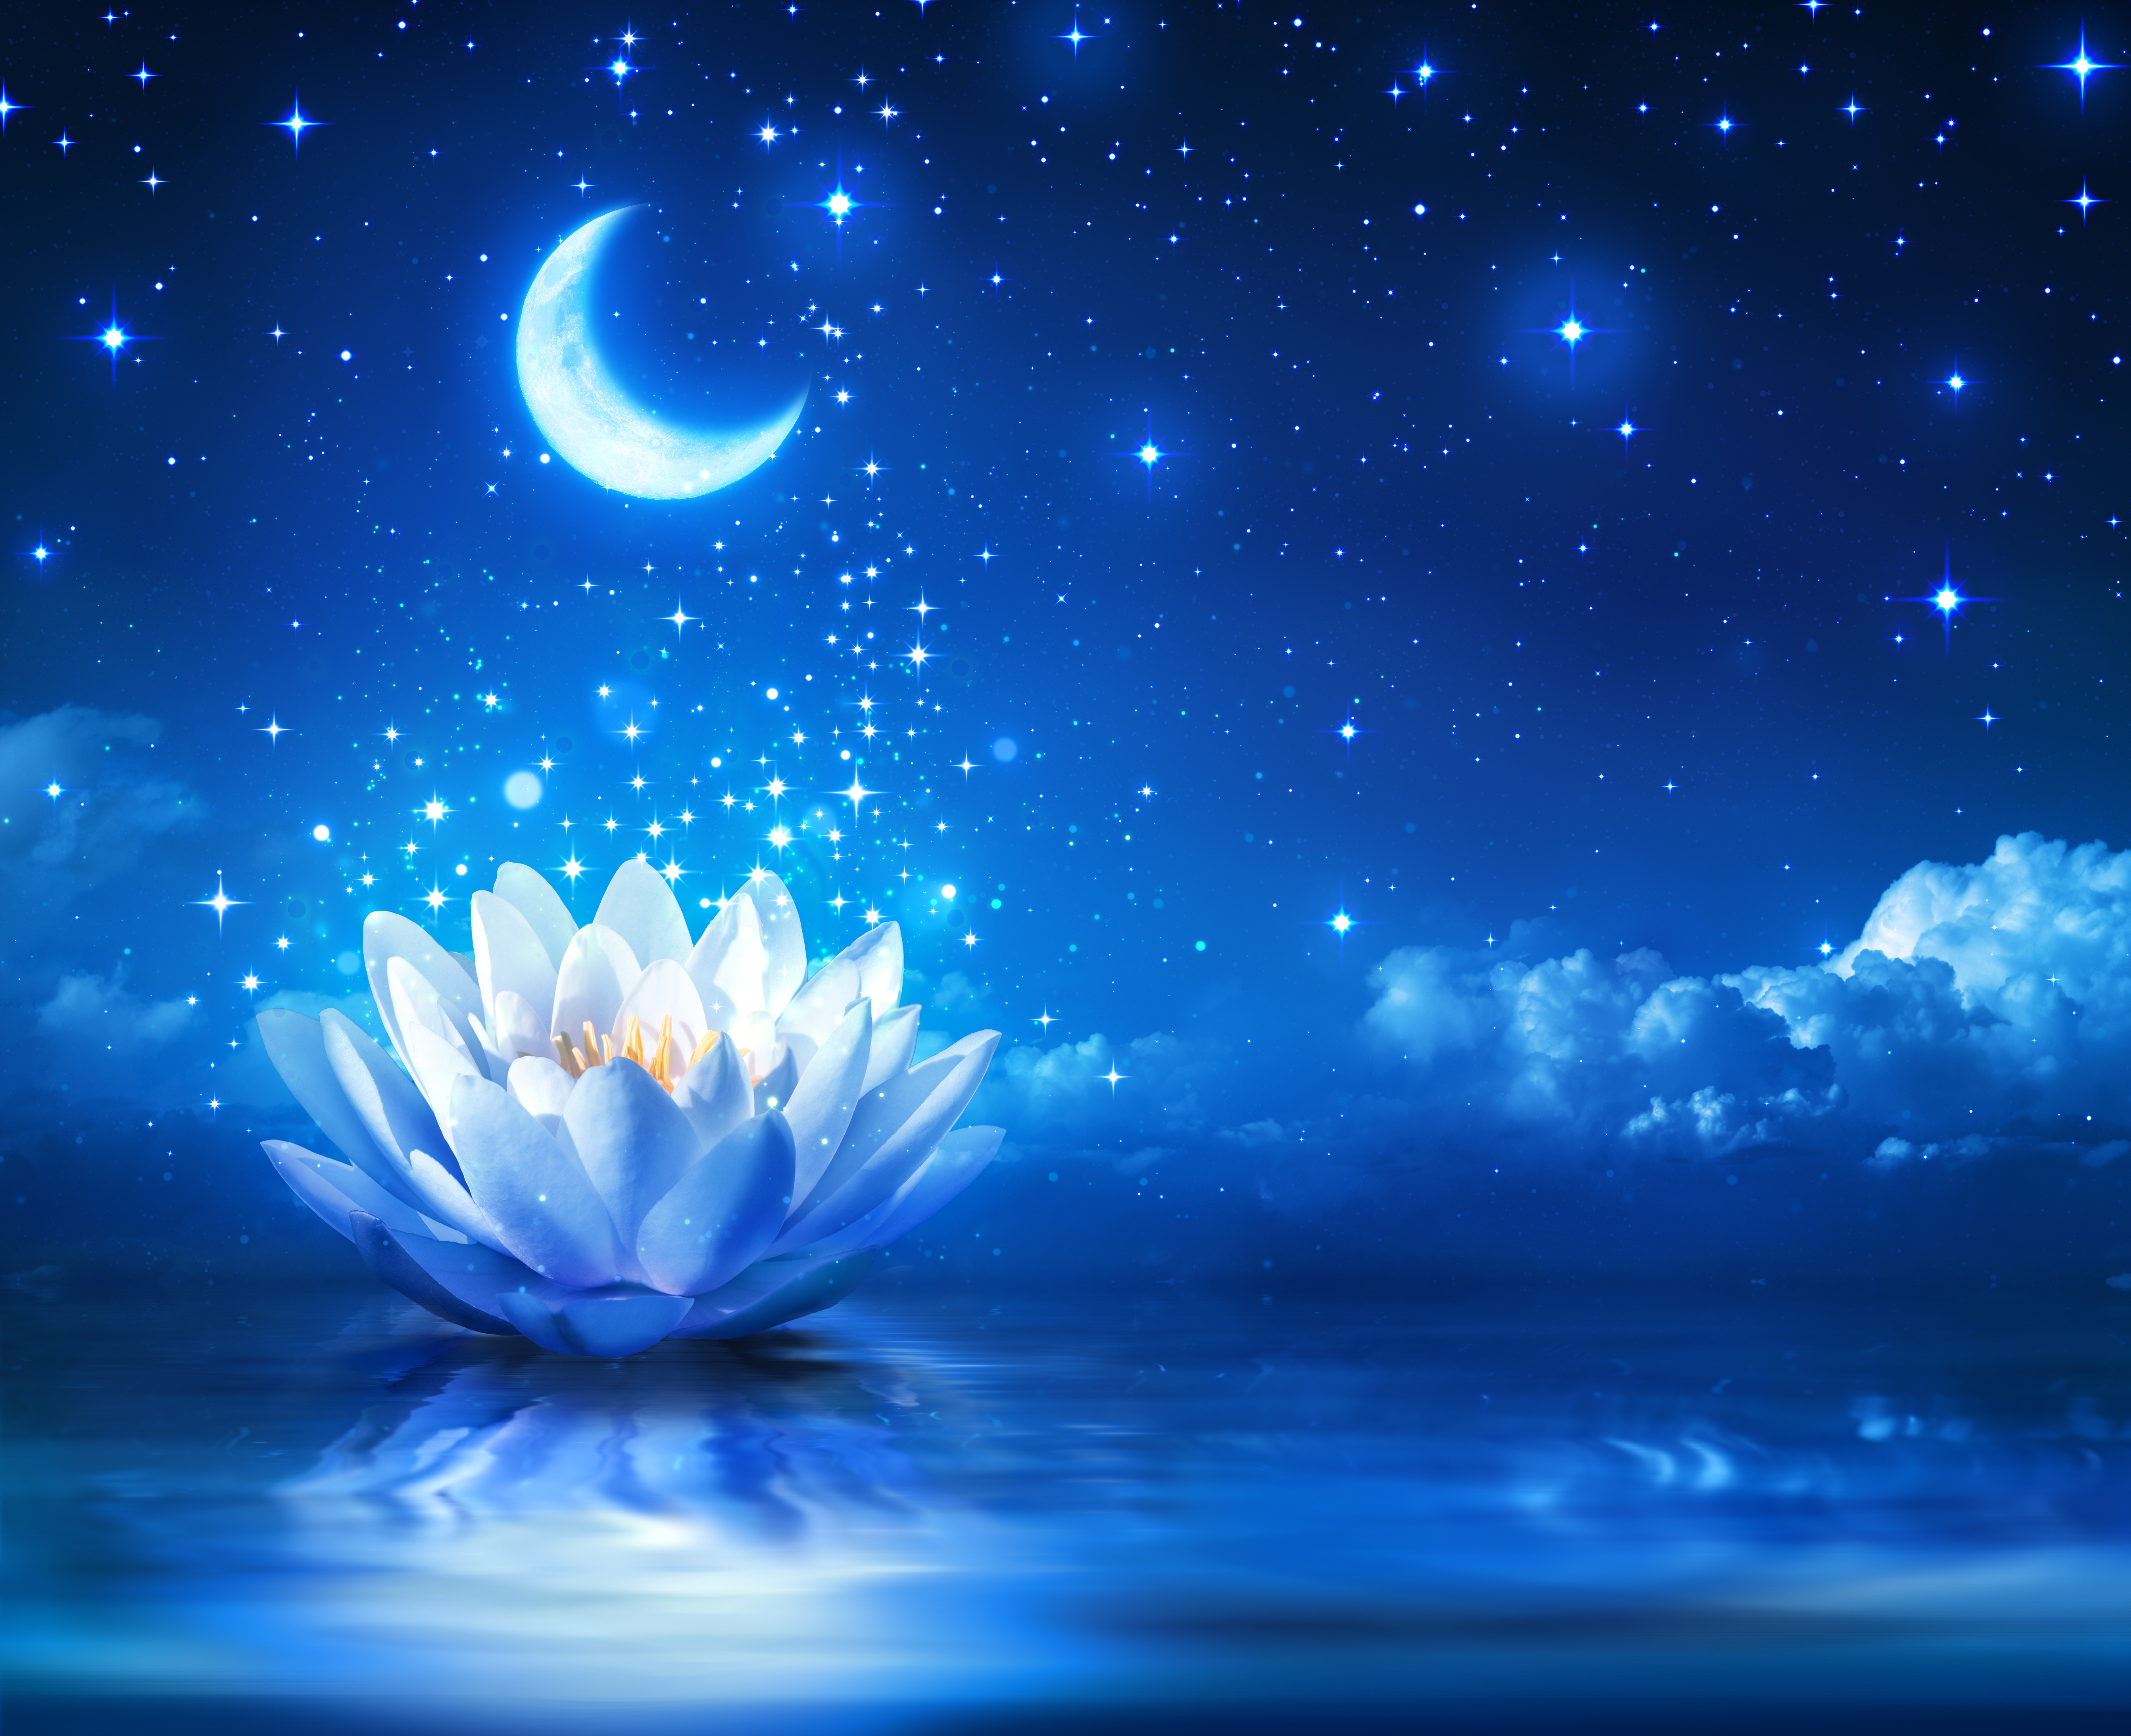 water lily, flowers, white flower, night, artistic, flower, moon, reflection, sparkles, stars